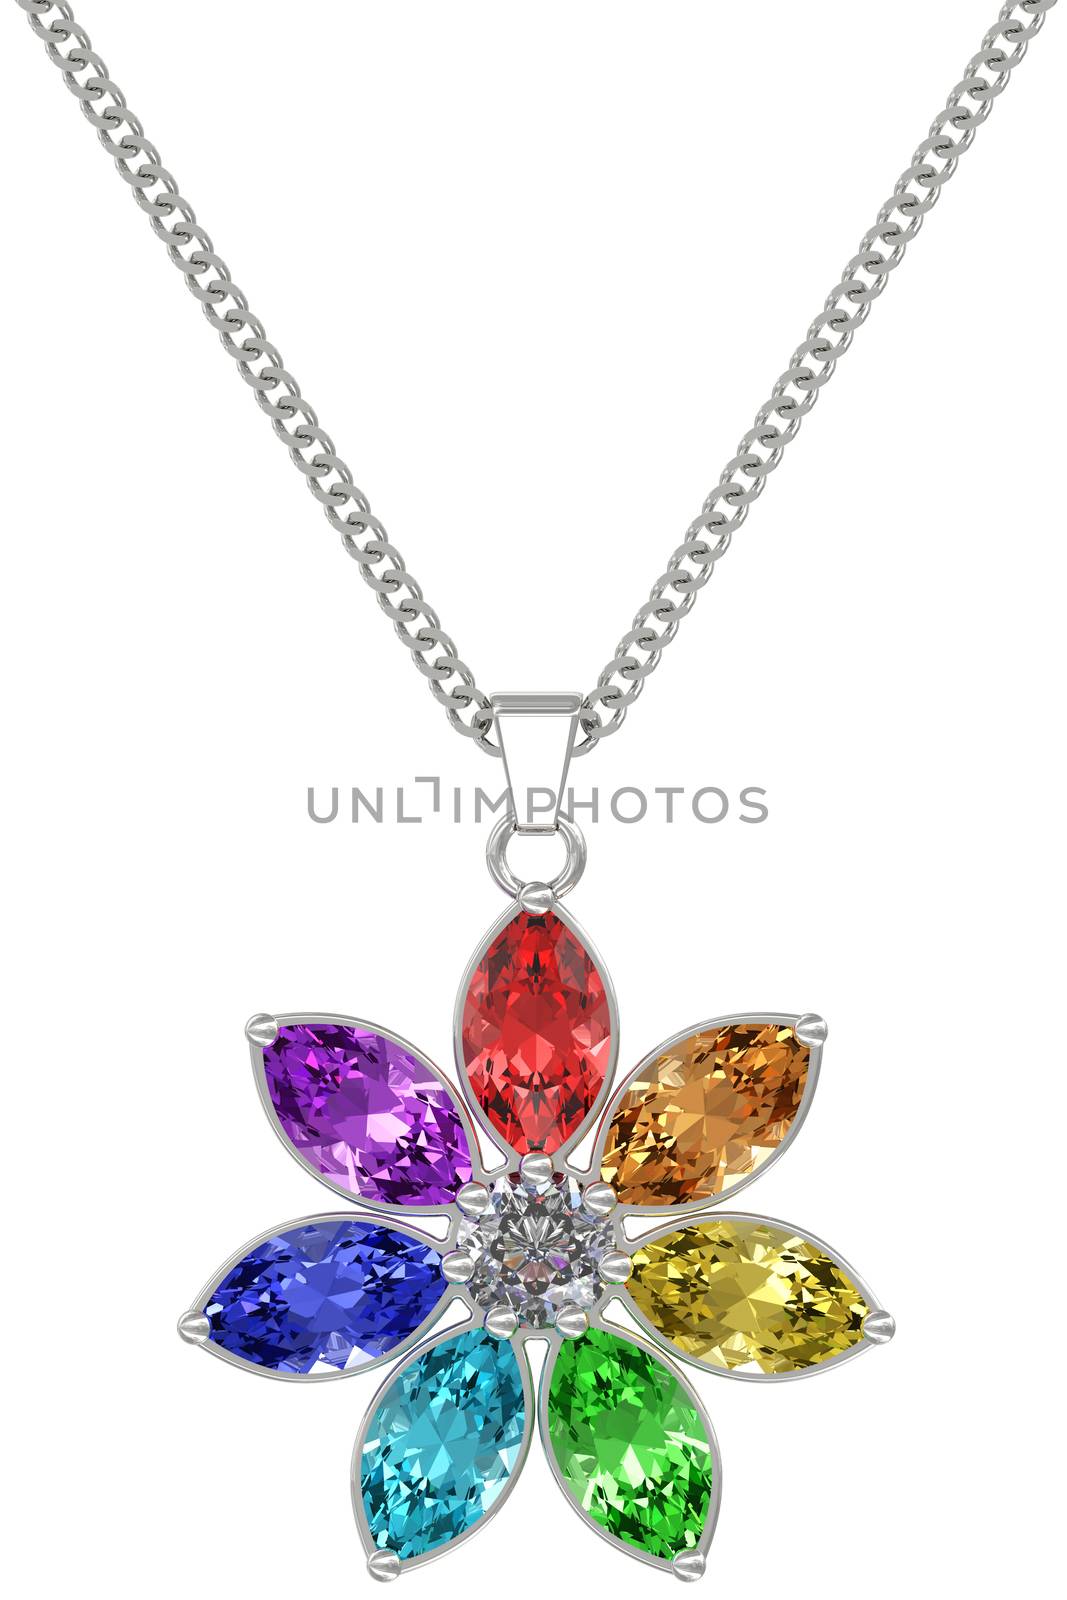 Silver or platinum pendant with colorful gemstones on chain isolated on white background. High resolution 3D image